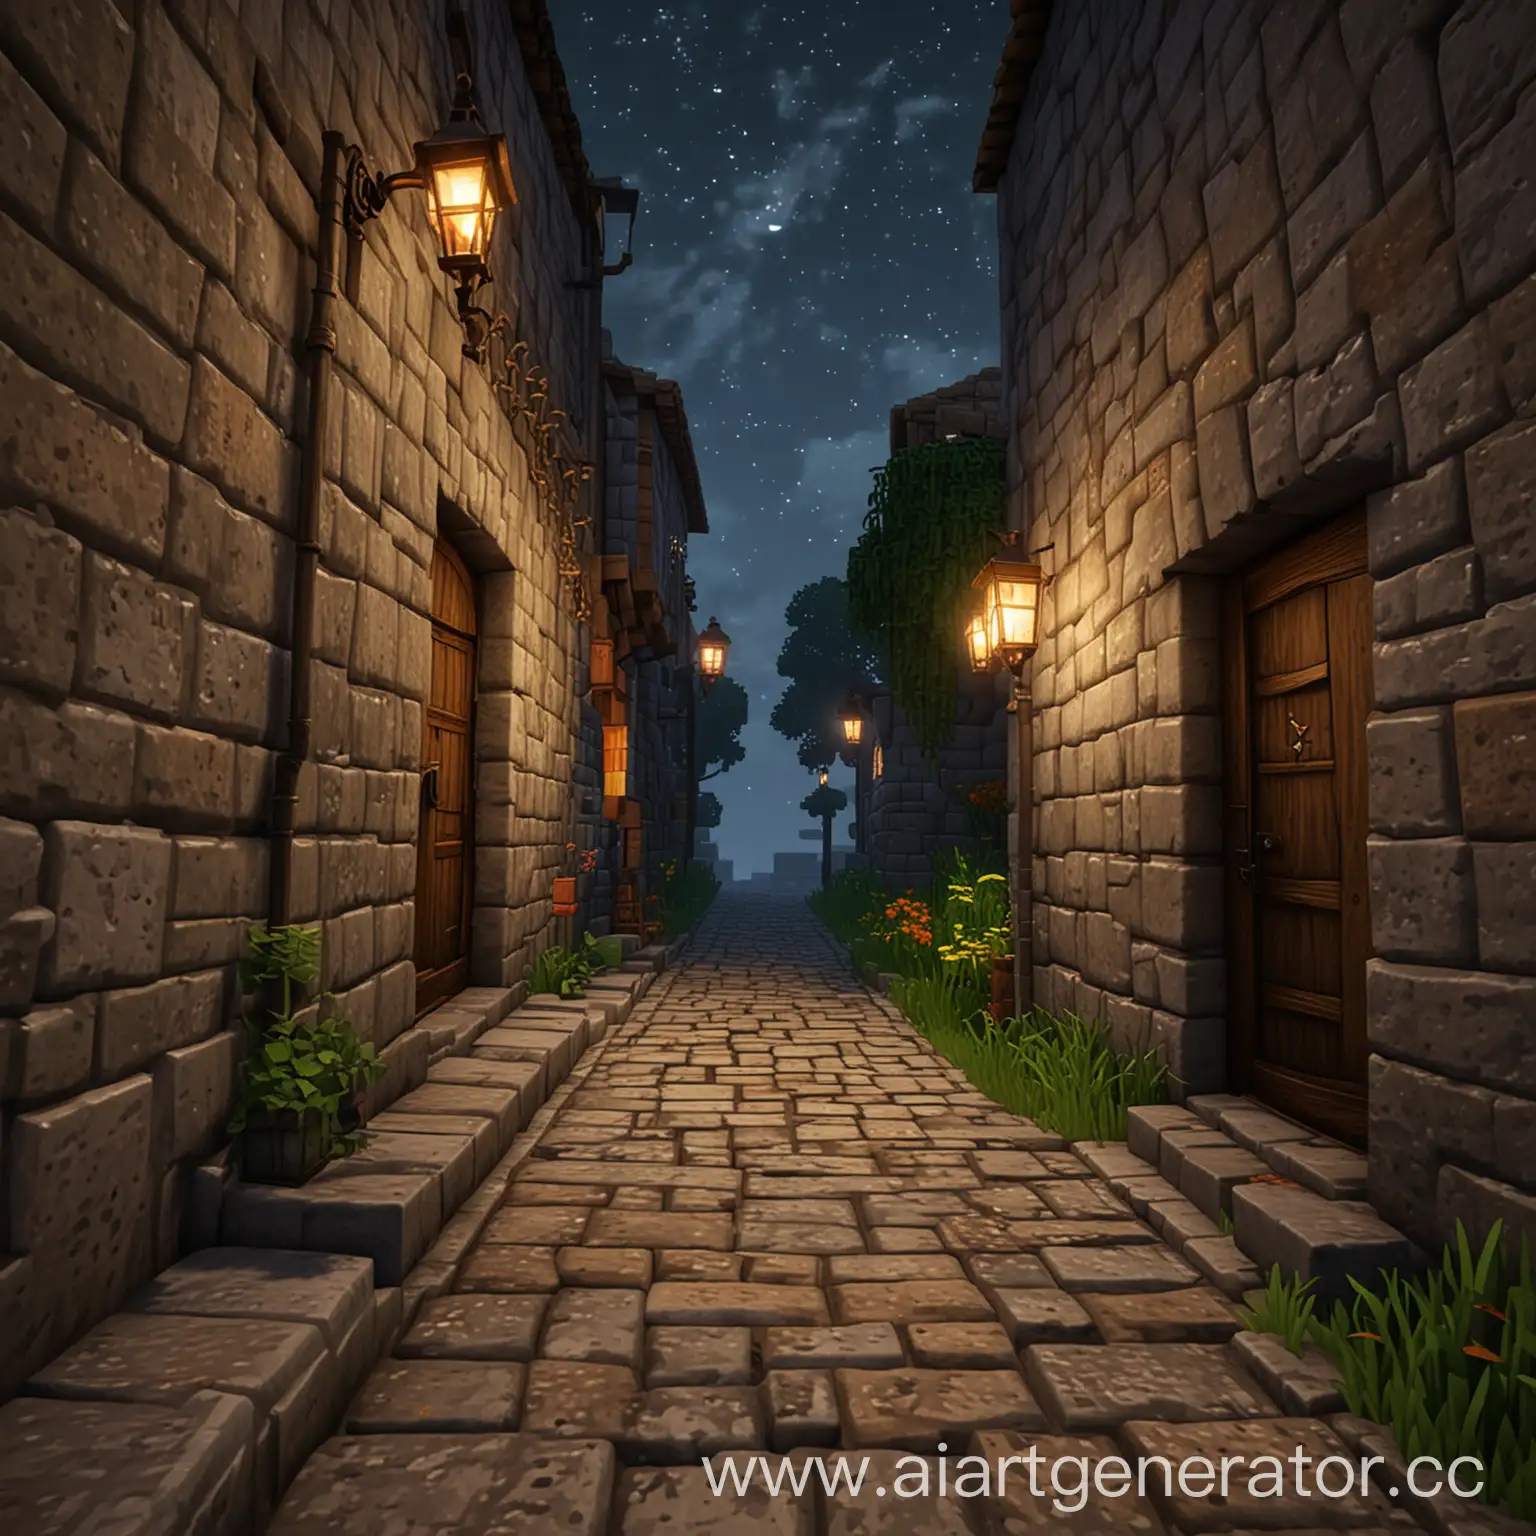 { "prompt": "A stone alley in the style of Minecraft with a single lamp burning. The alley is made of various stone blocks, with a cobblestone path running through it. The walls on either side are tall and blocky, typical of Minecraft's pixelated aesthetic. The only source of light is a lone lamp hanging from a stone wall, casting a warm, flickering glow on the cobblestone below. There is also a wooden door in the alley, from which a bright light is spilling out, illuminating part of the cobblestone path. The sky above is dark, indicating nighttime, and the overall scene is serene and quiet, capturing the essence of a Minecraft world at night.", "size": "2560x423" }